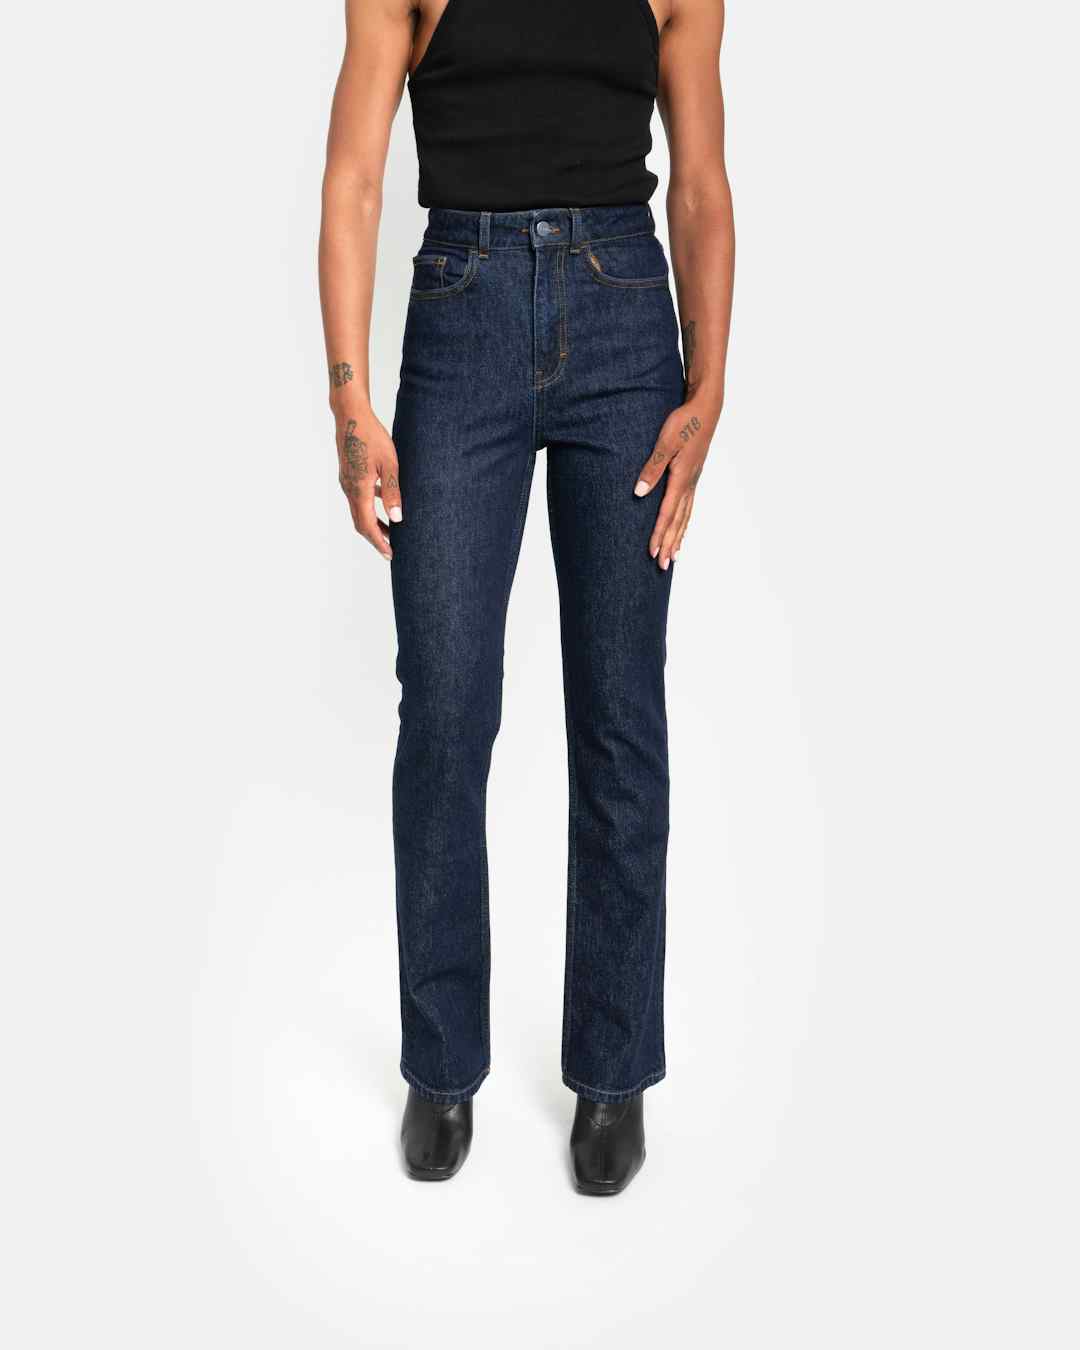 Bootcut jeans in indigo